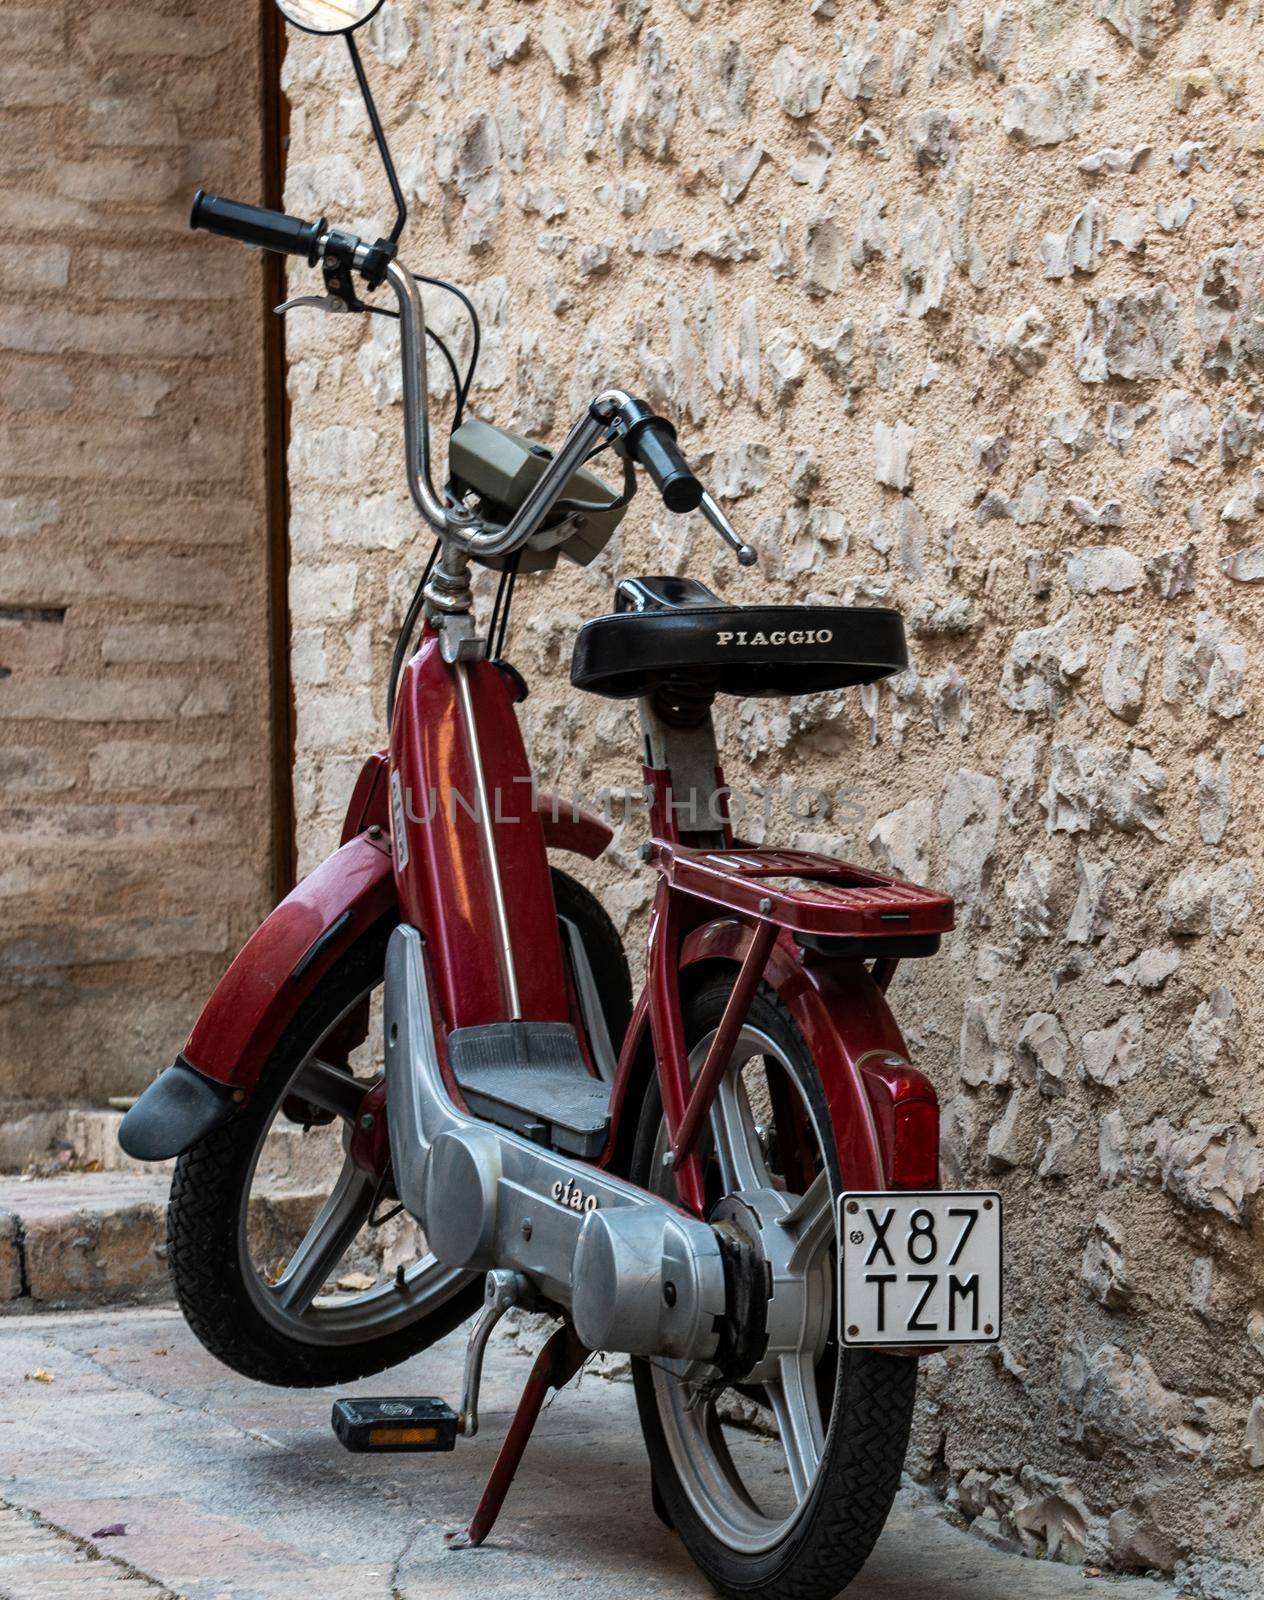 vintage piaggio scooter hi red color by carfedeph